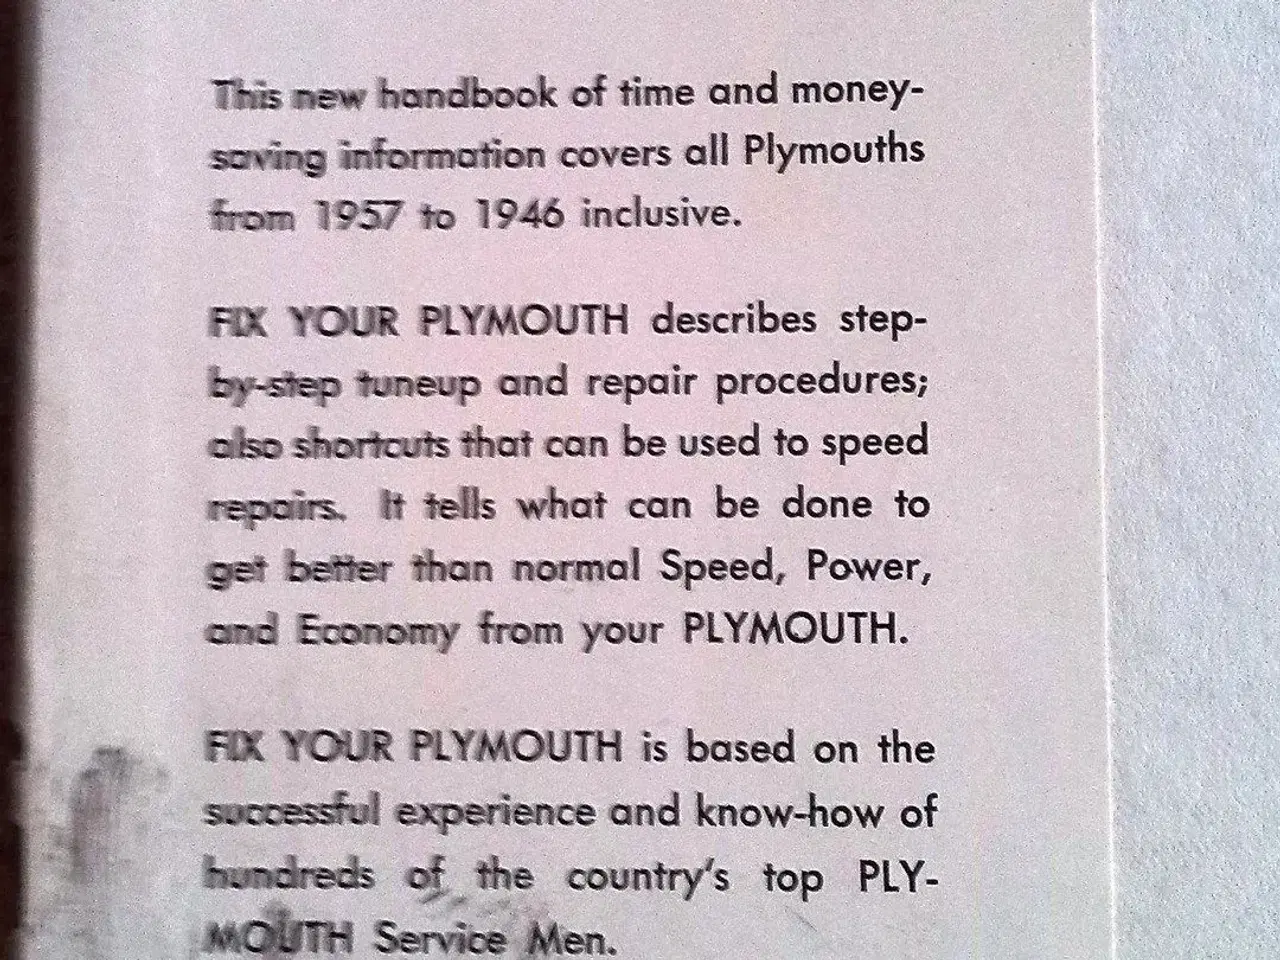 Billede 2 - Fix your Plymouth.